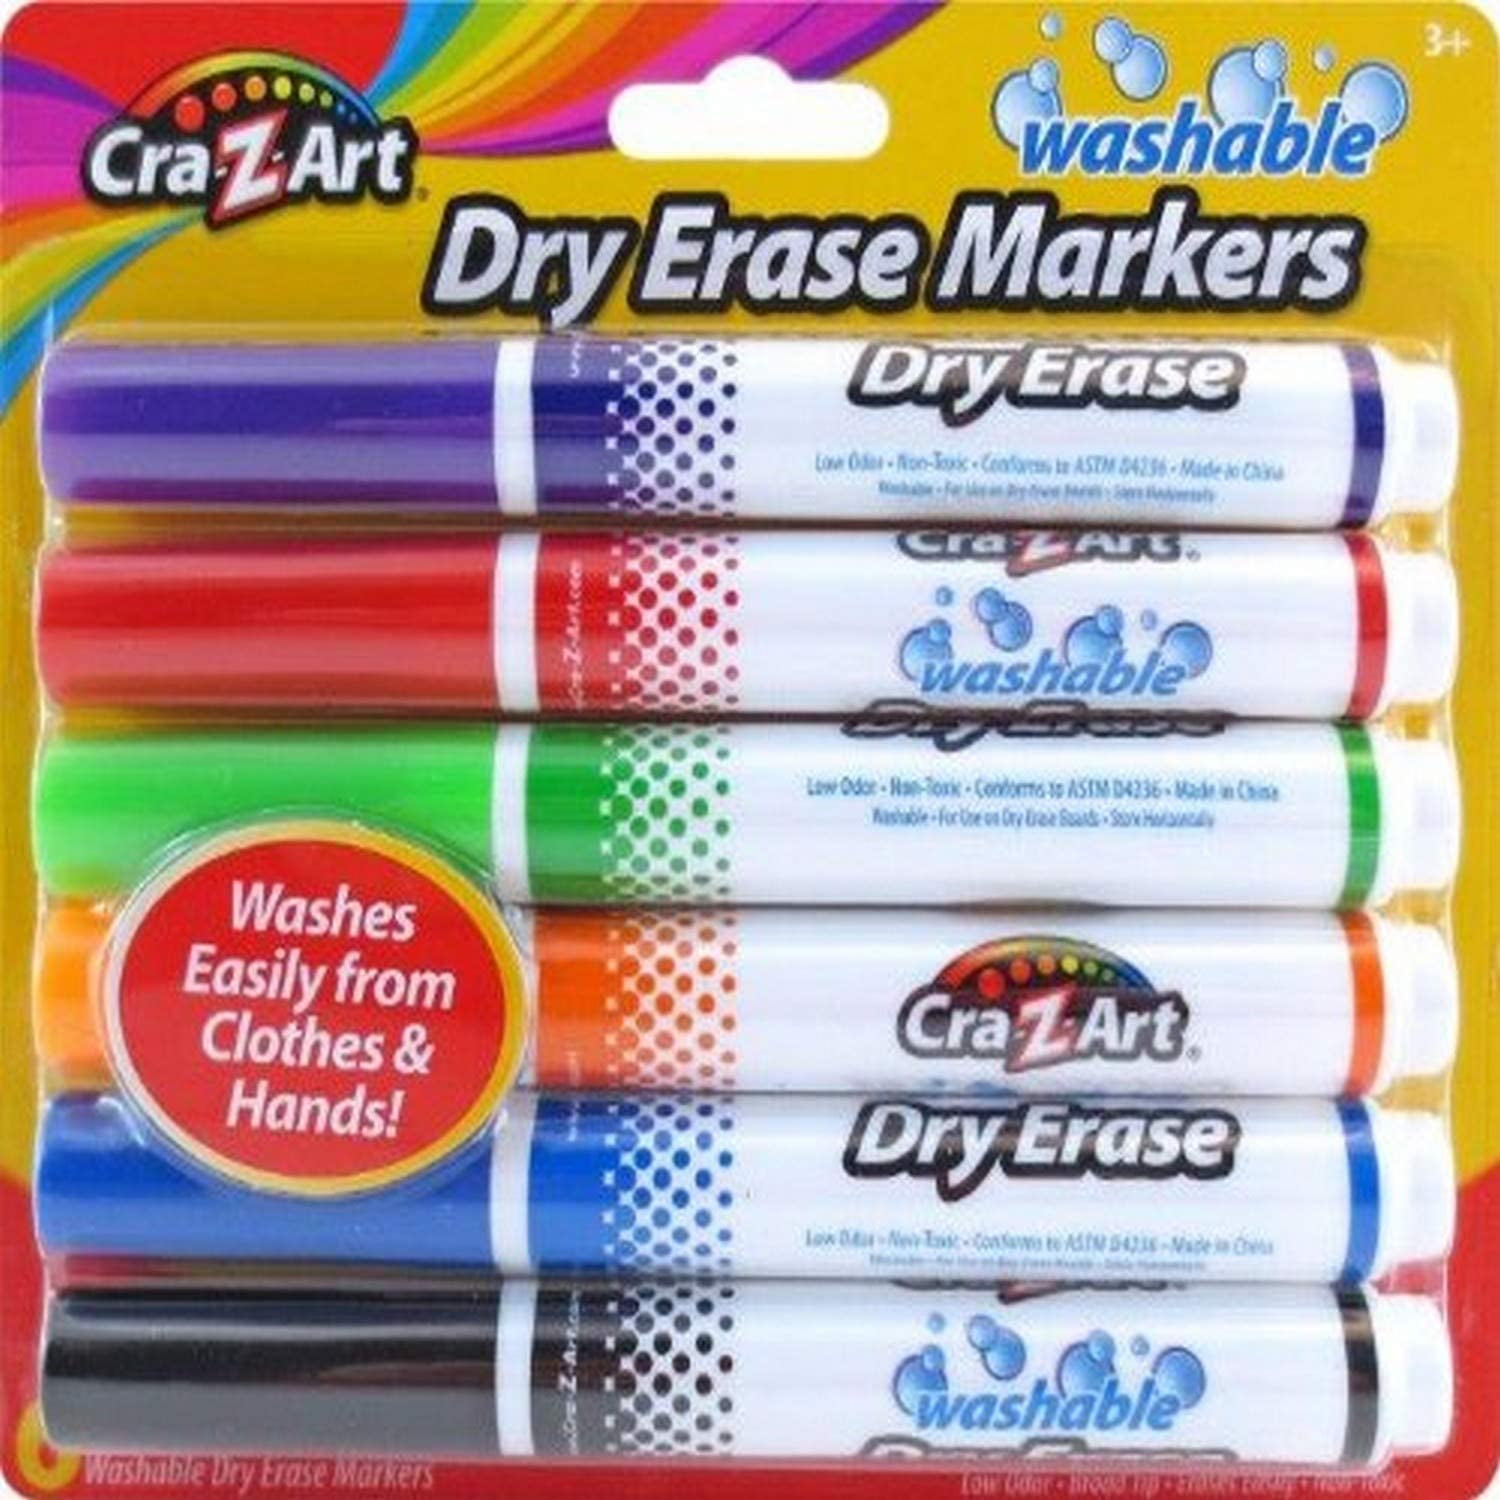 Happido Double Ended Washable Markers for Kids, Washable Dry Erase Markers  for Kids, Water Based Markers, Kids Washable Markers, Non-Alcohol Color